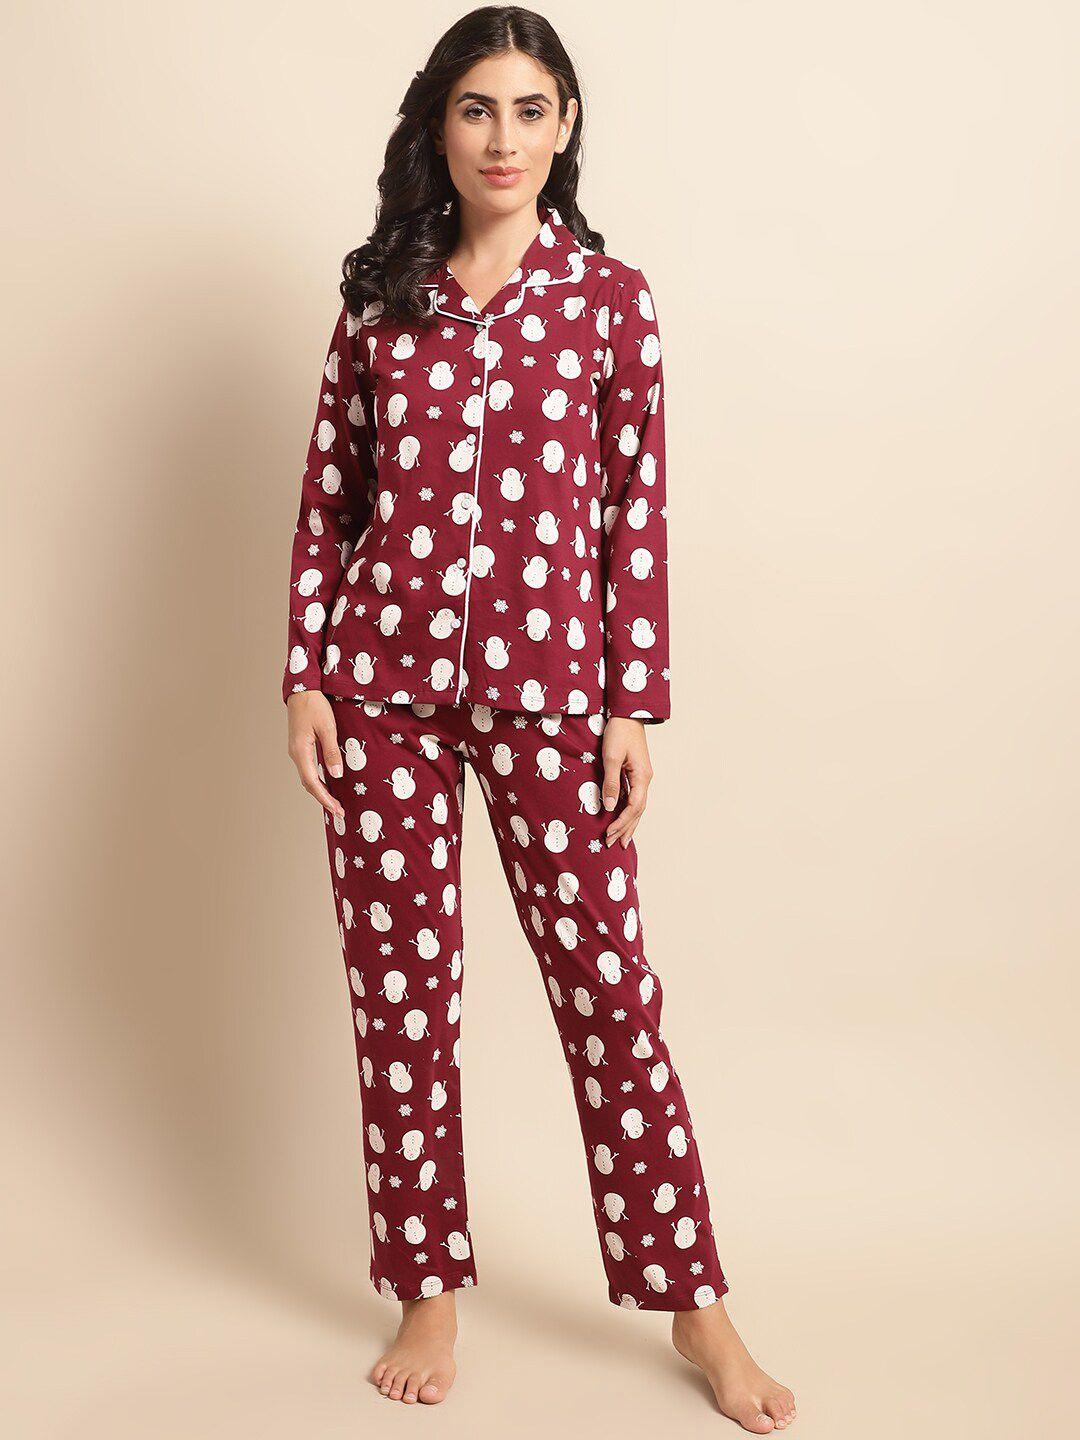 kanvin red & white conversational printed pure cotton night suit